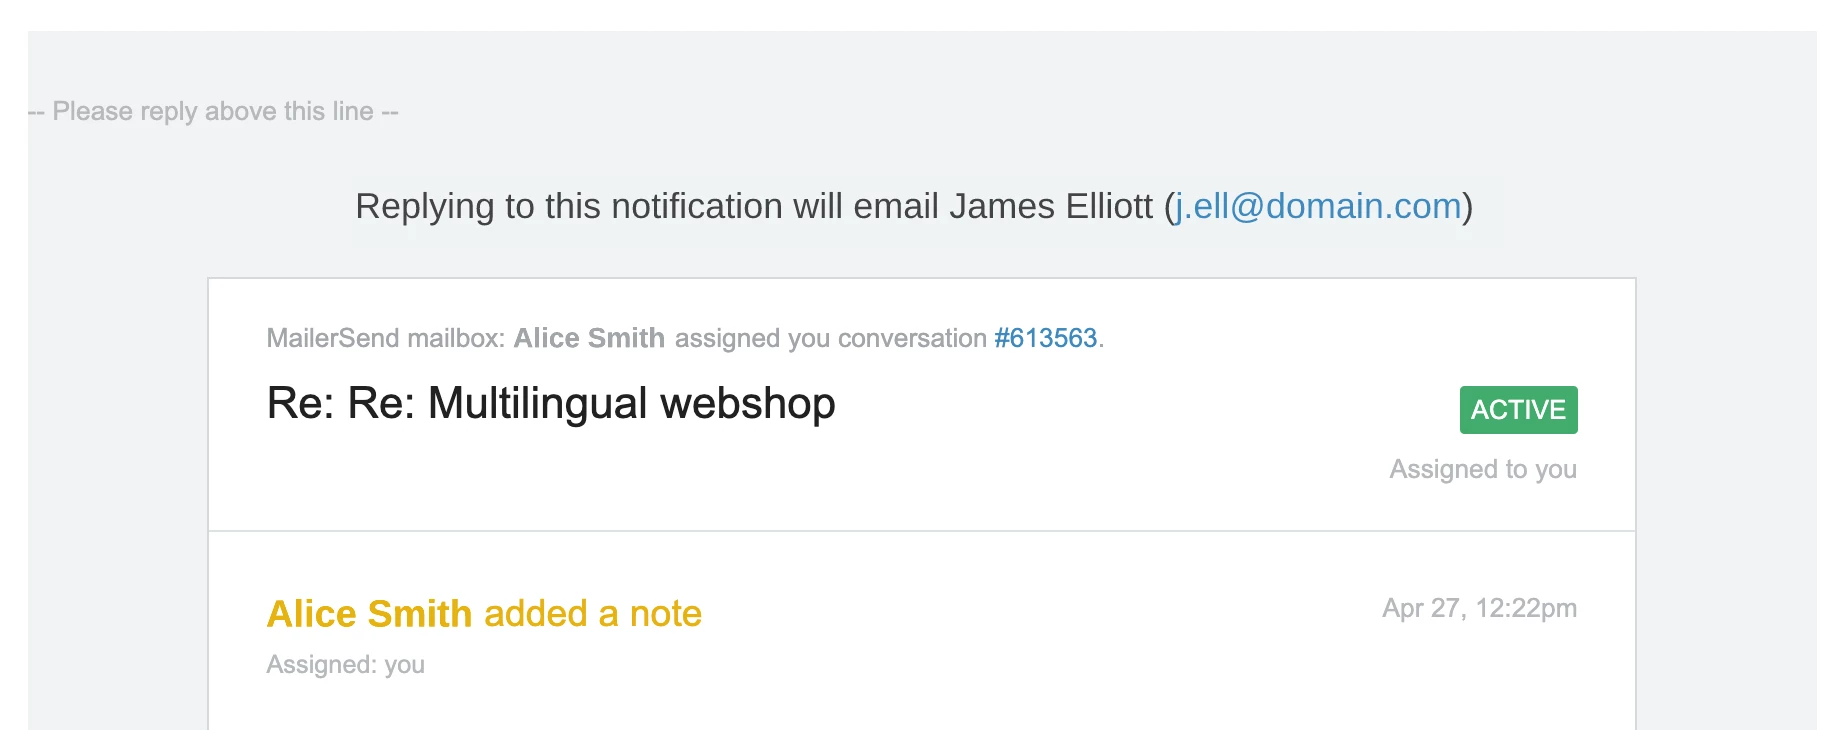 An email from HelpScout notifying the recipient that replying to the notification will email the user.